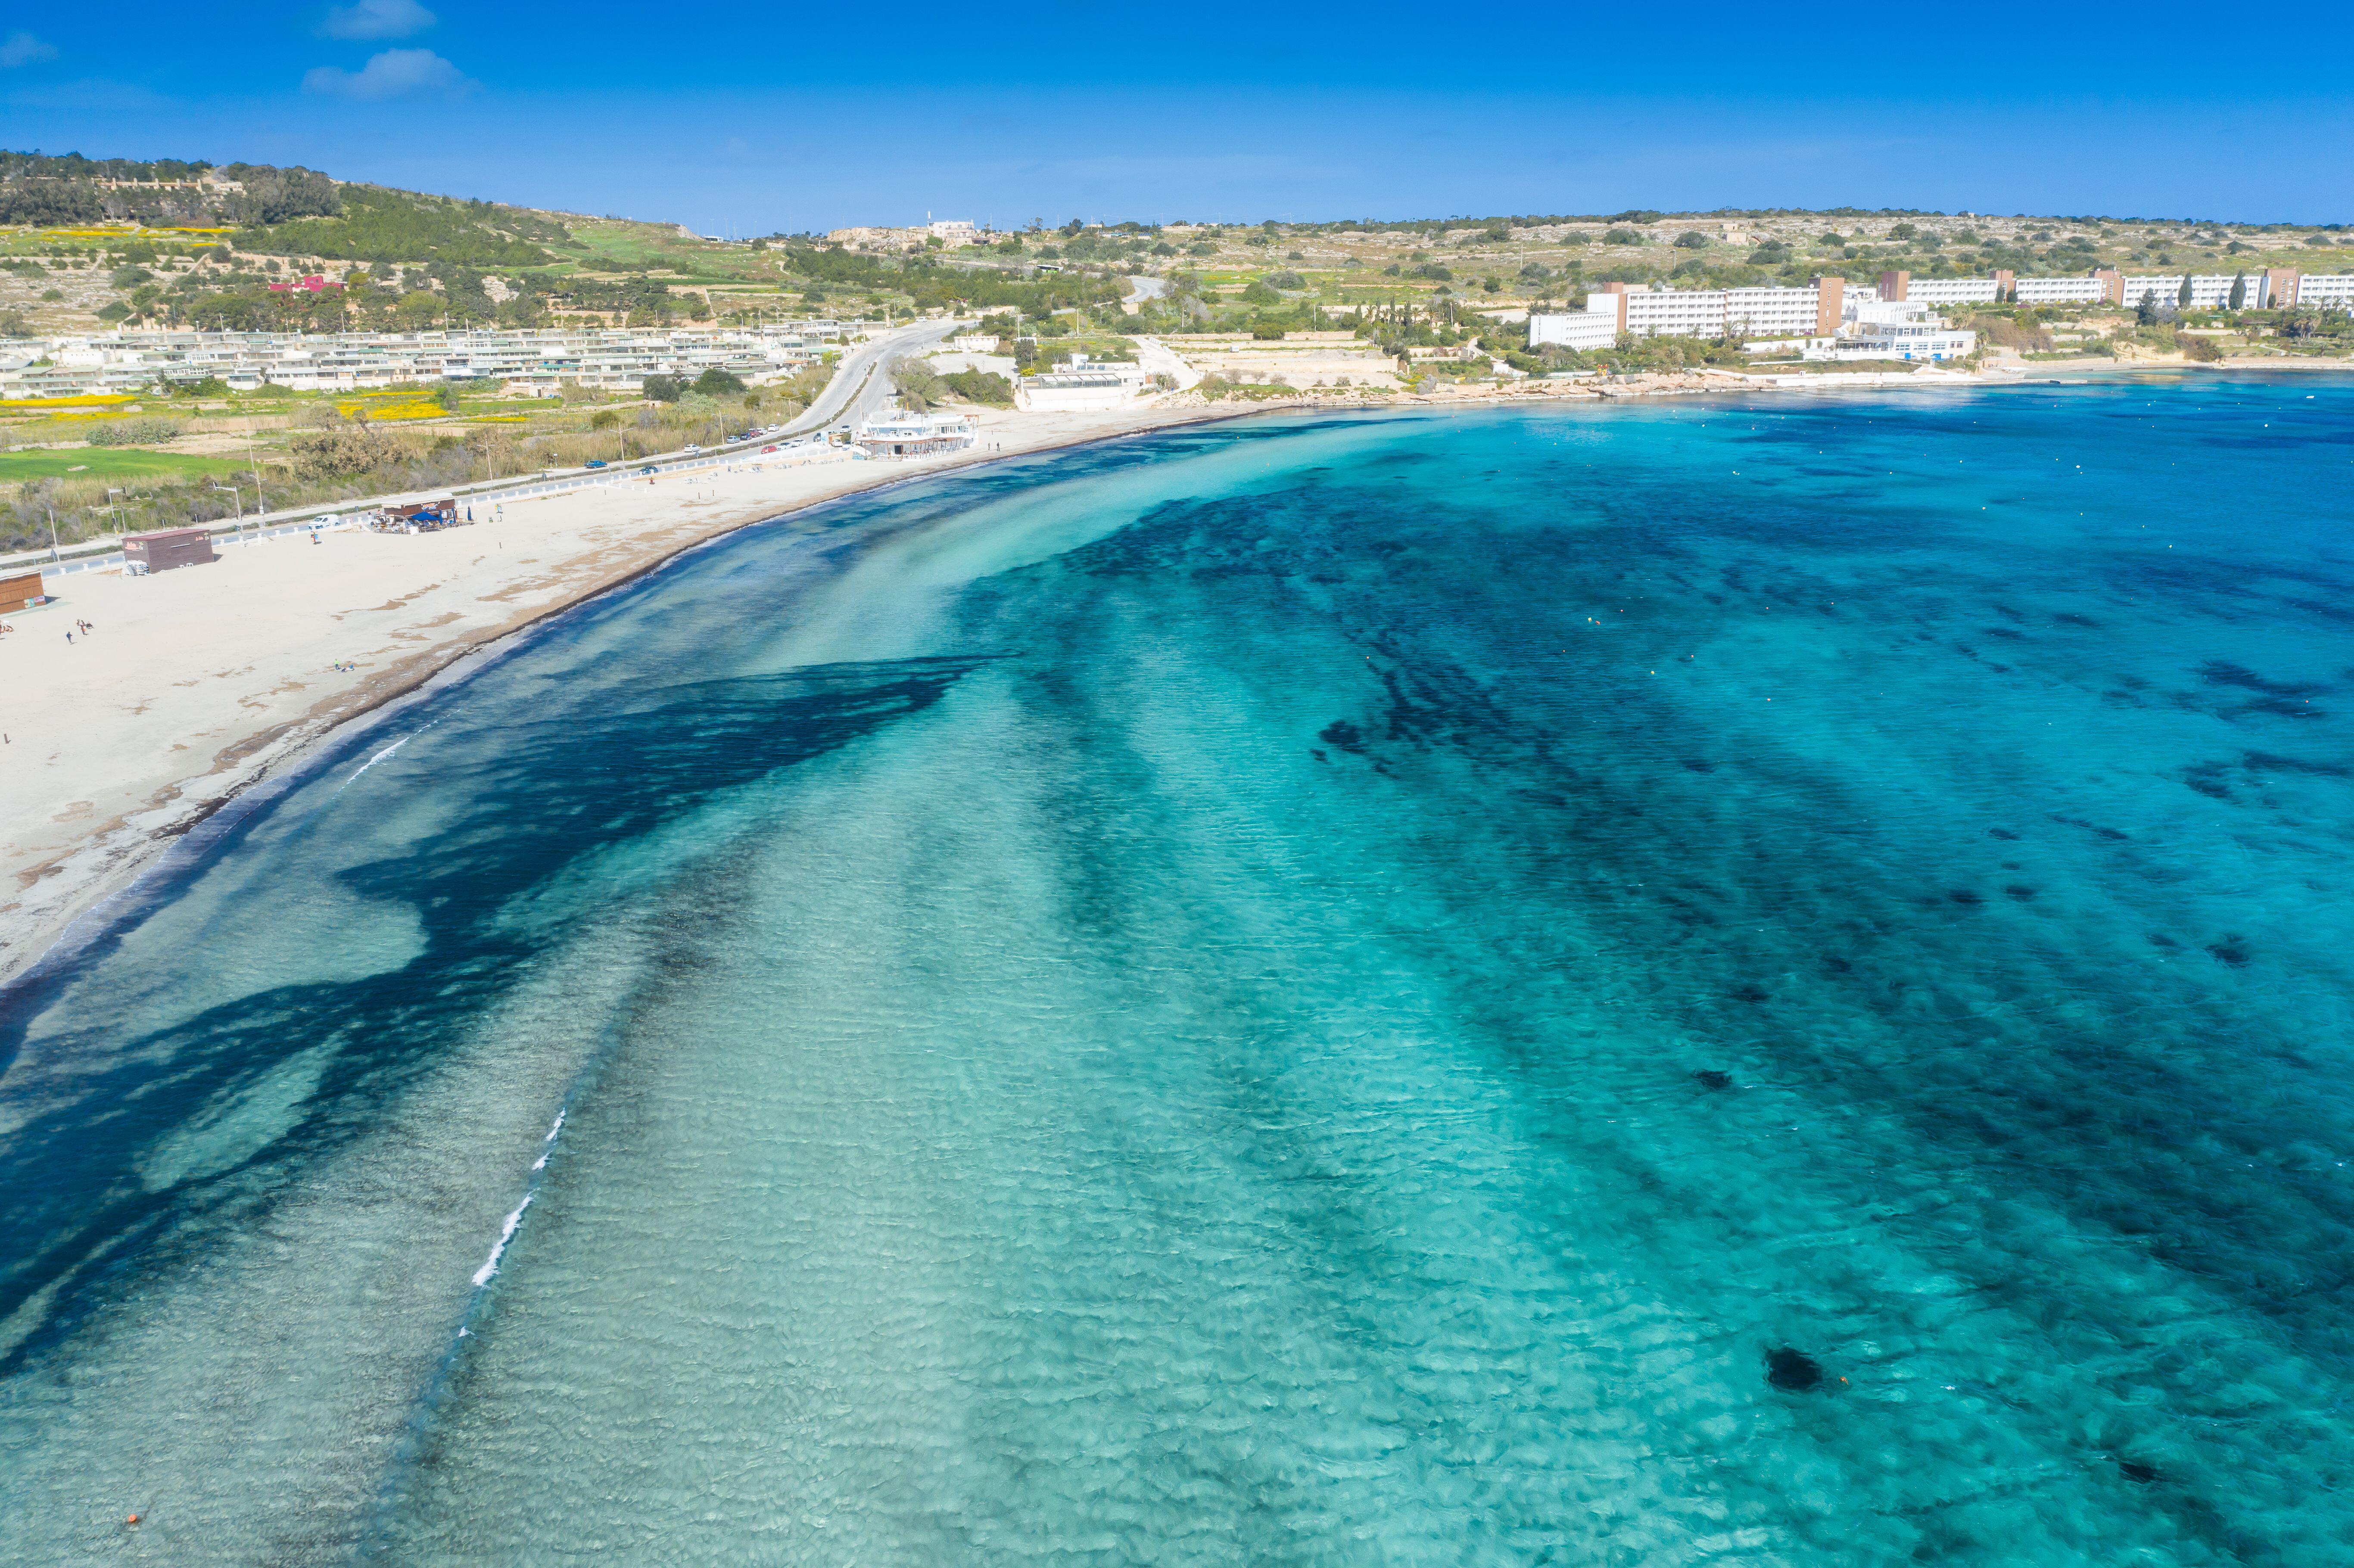 Malta may be on the green list – but leaving the island will have you swimming in bureaucracy